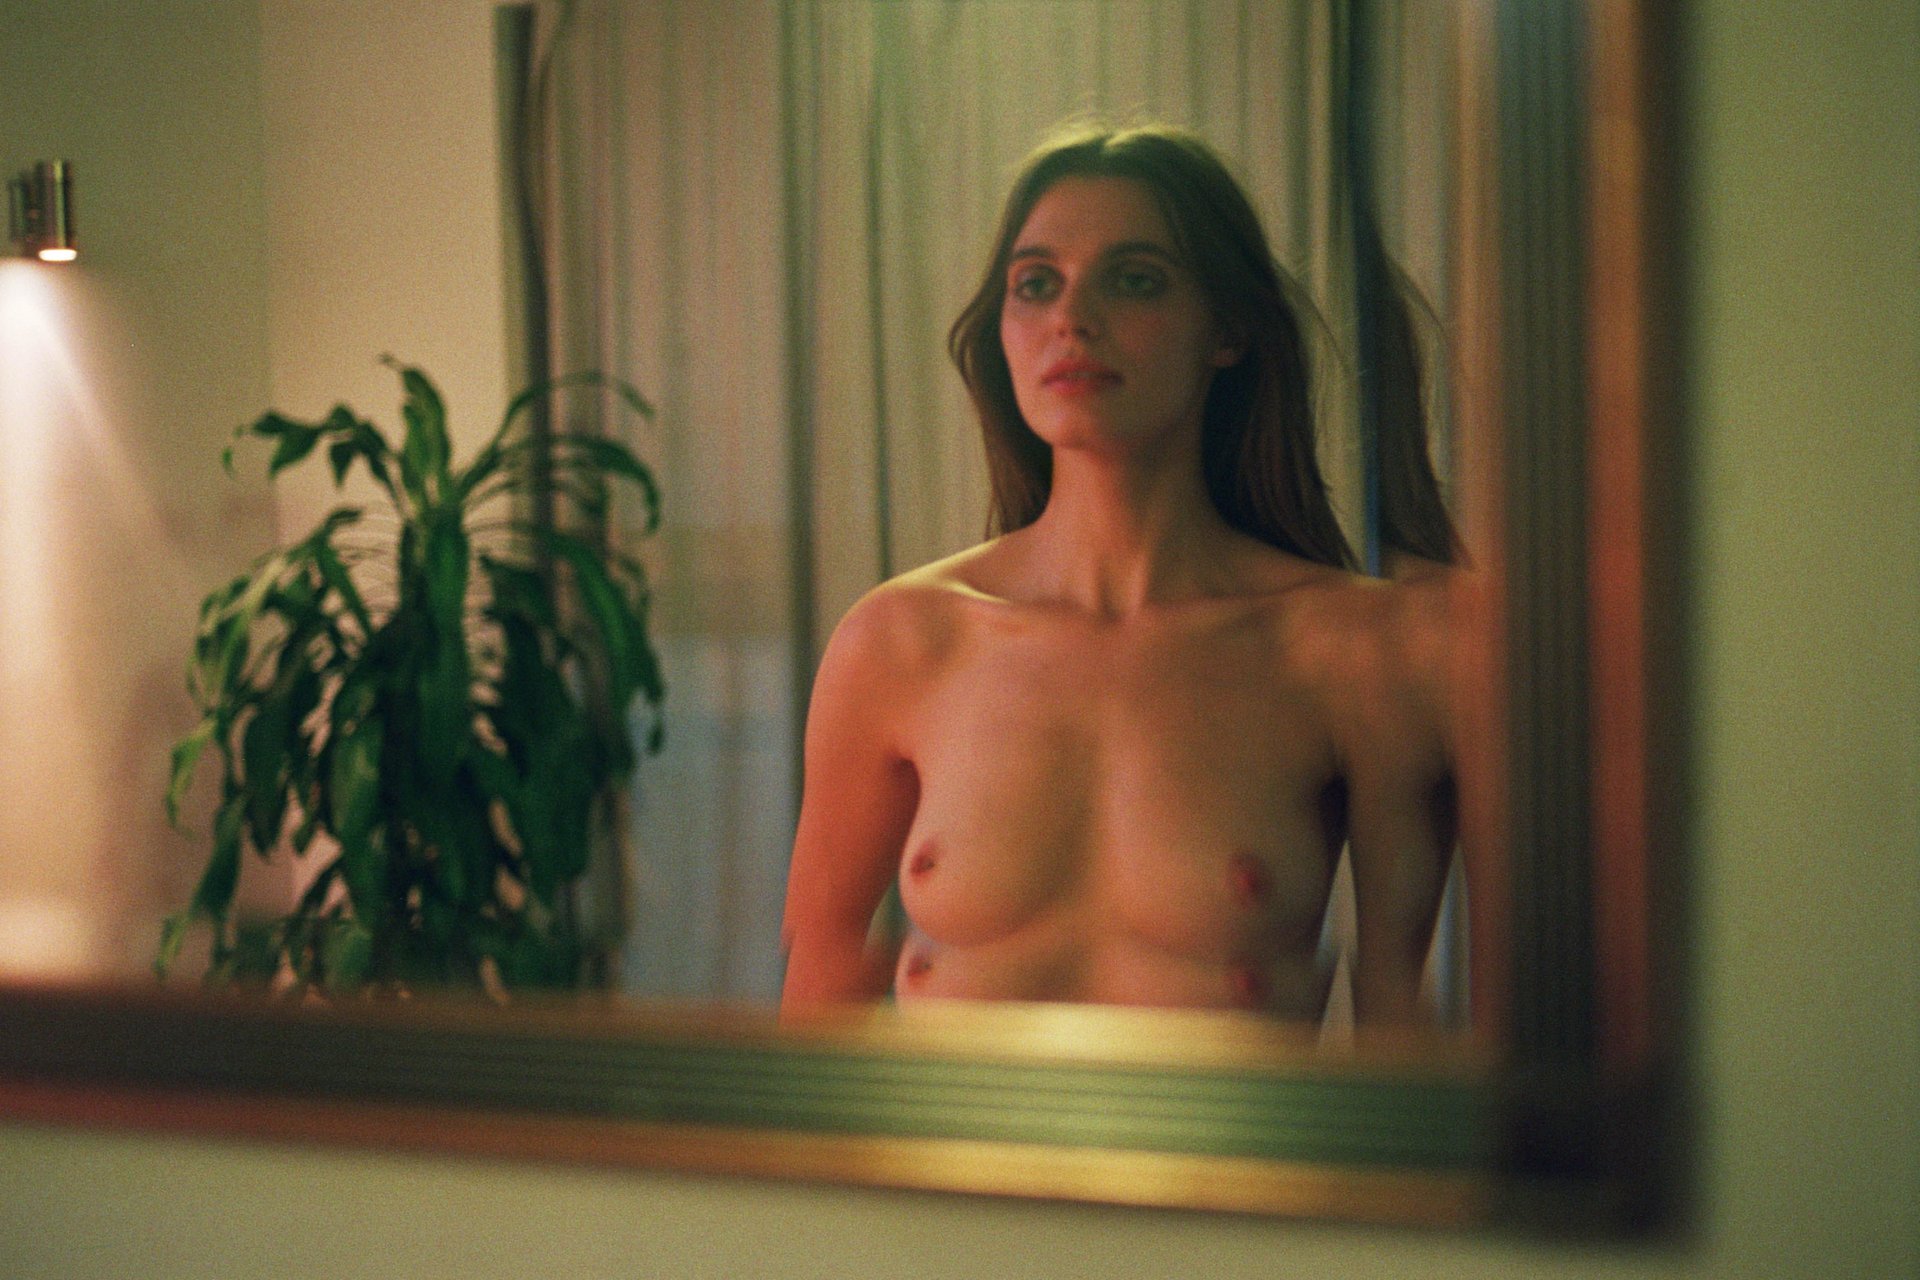 Check out the nude photos and video of Lola McDonnell by Alessandro Casagra...